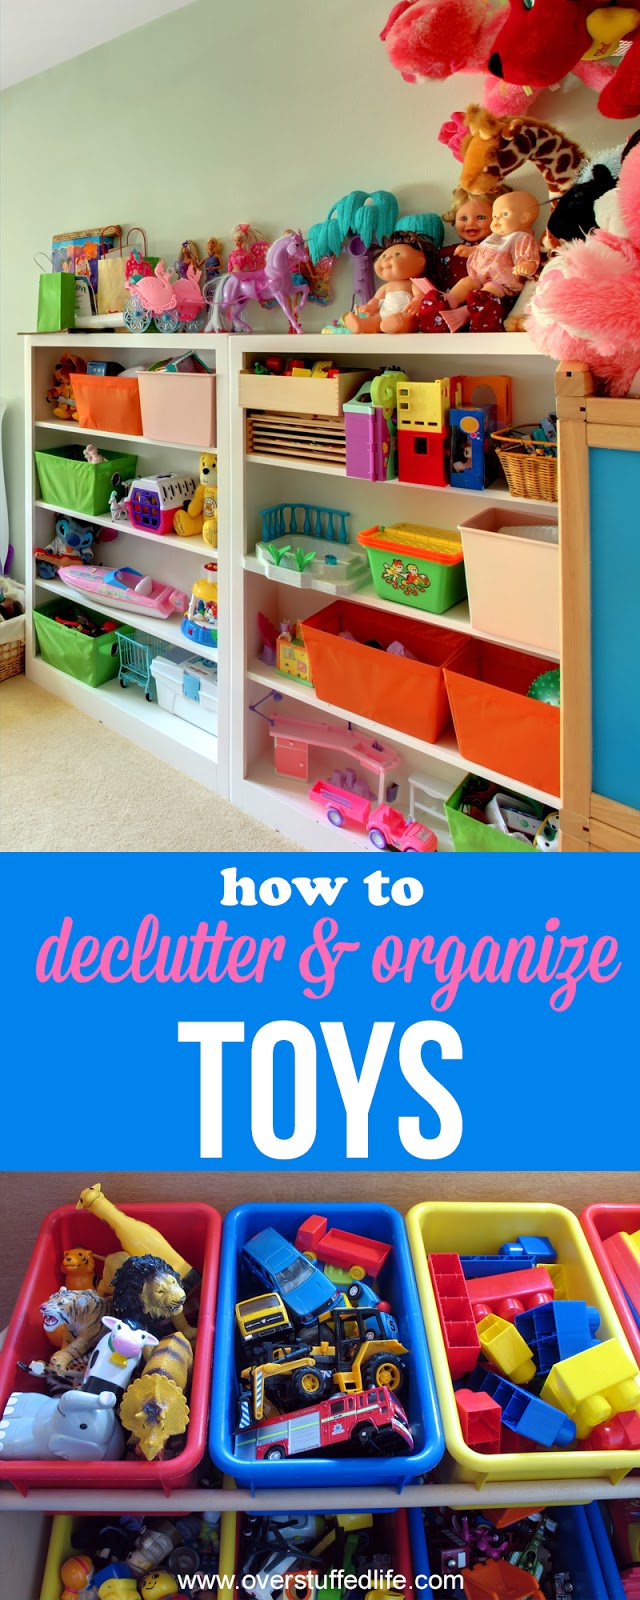 toy organization | organize play room | toy storage ideas| Organize American Girl Doll clothes and accessories | tips to declutter kids toys | how to get rid of toys | ideas for organizing and decluttering toys | get rid of toy clutter | clean play room